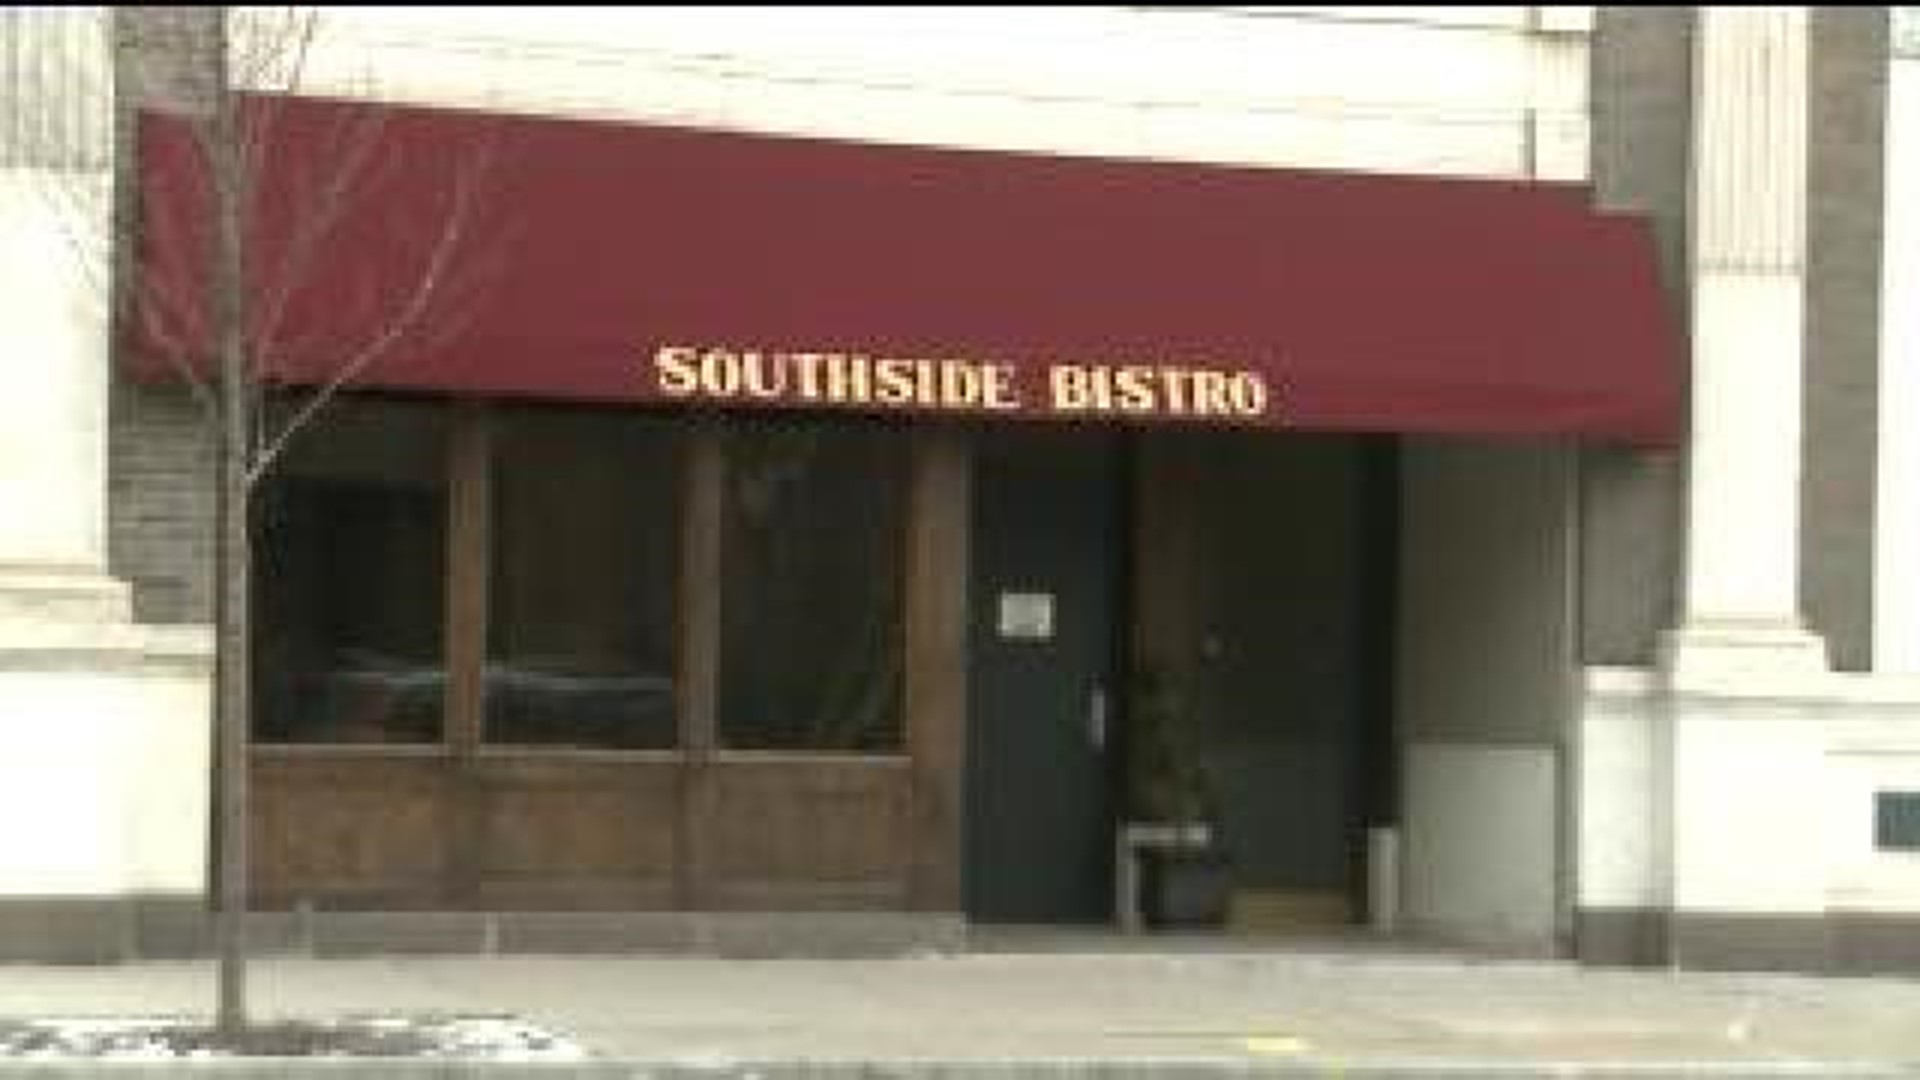 Recently Opened French Restaurant Closes